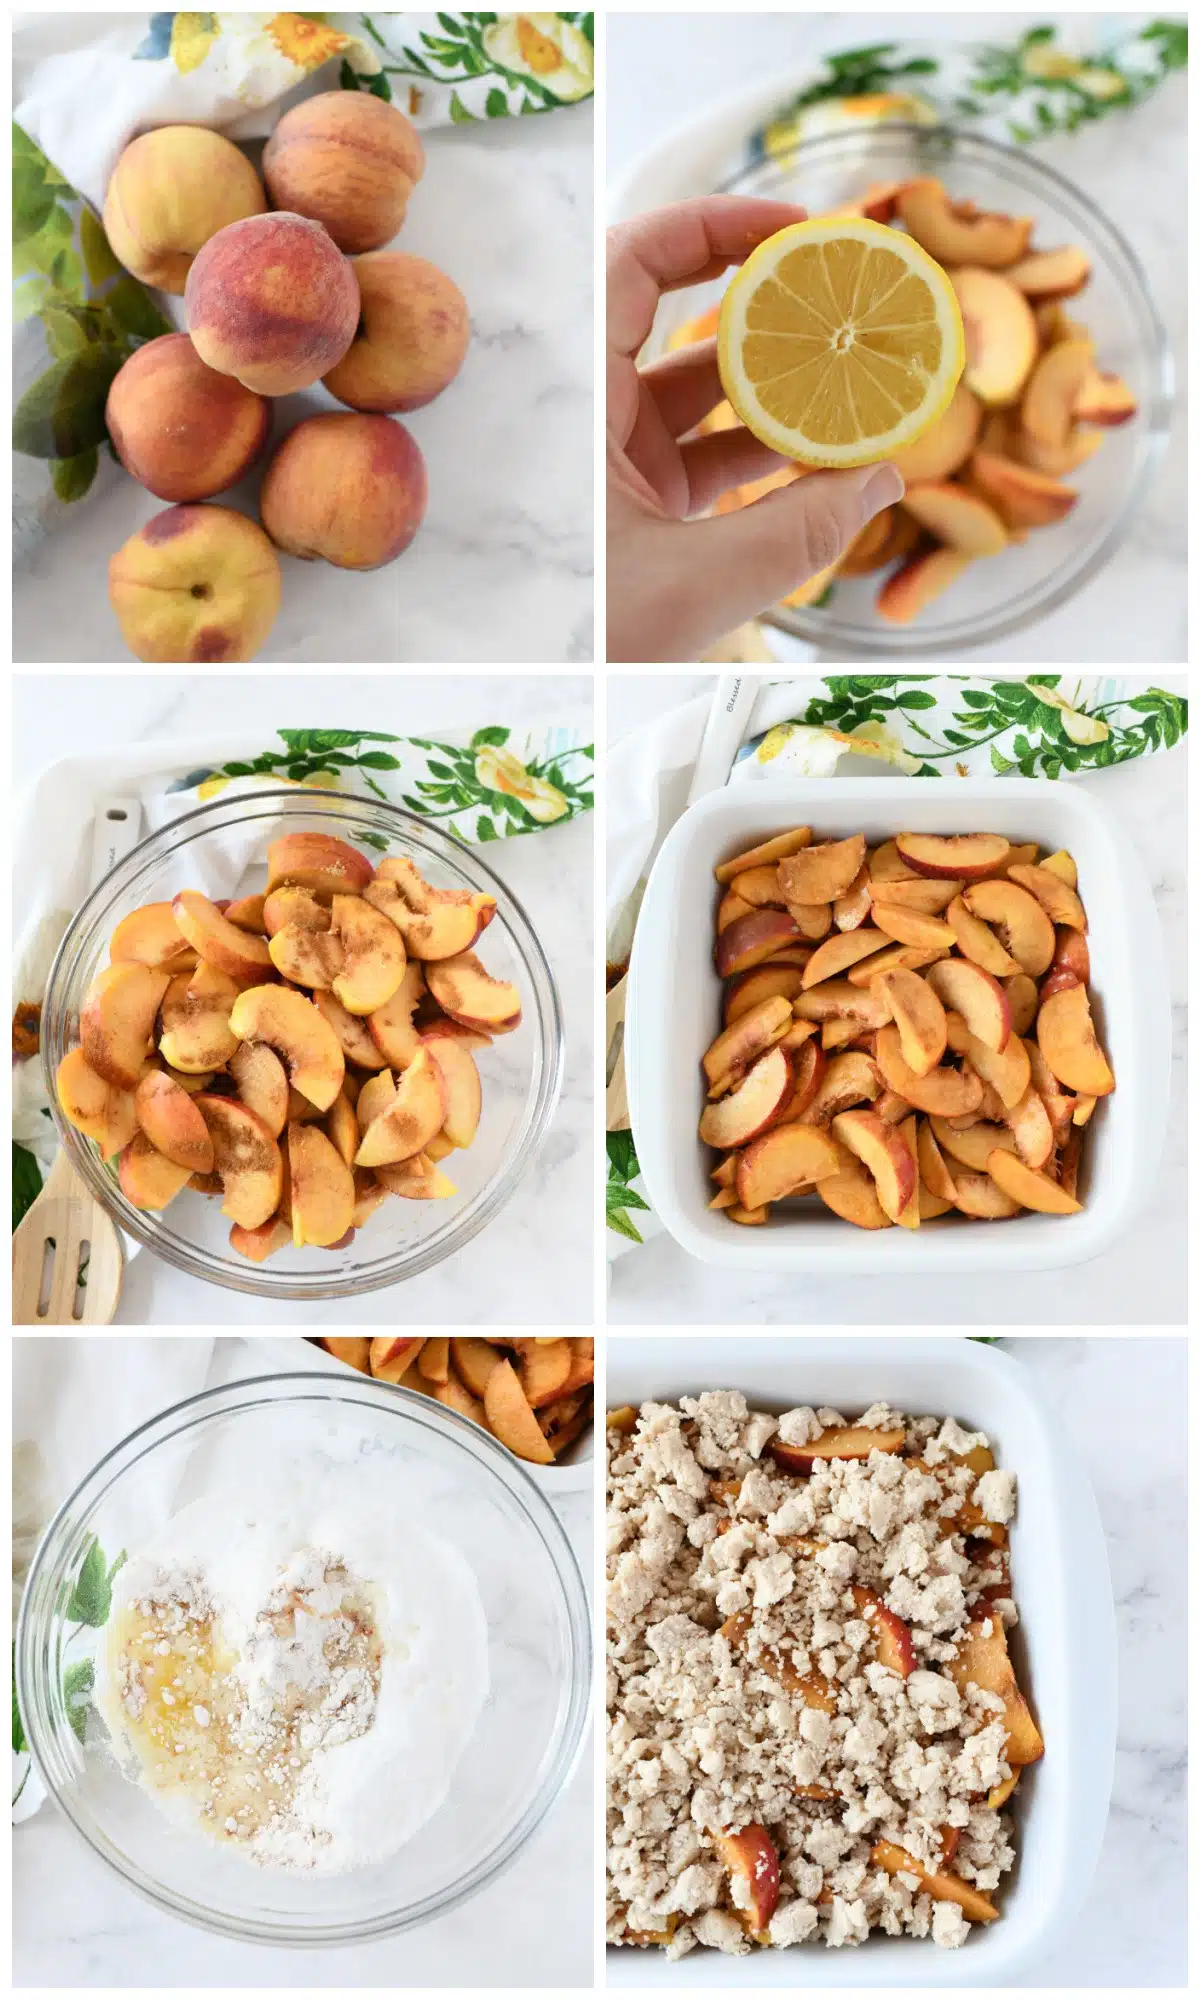 A collage of 6 images showcasing how to make peach crumble from start to finish.